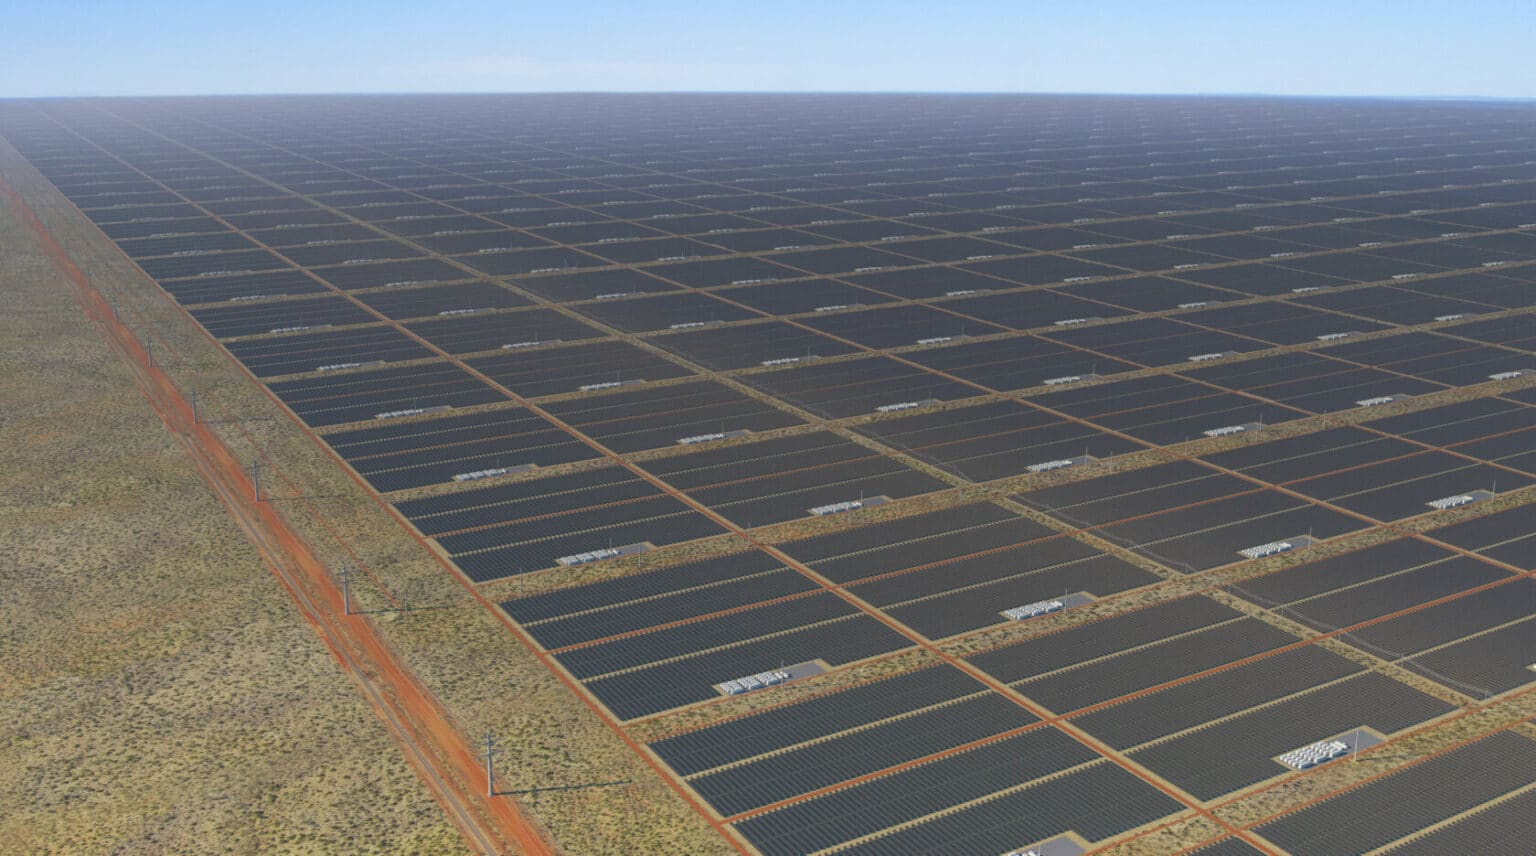 Image of Proposed Sun Cable Solar Farm located in the Northern Territory, Australia